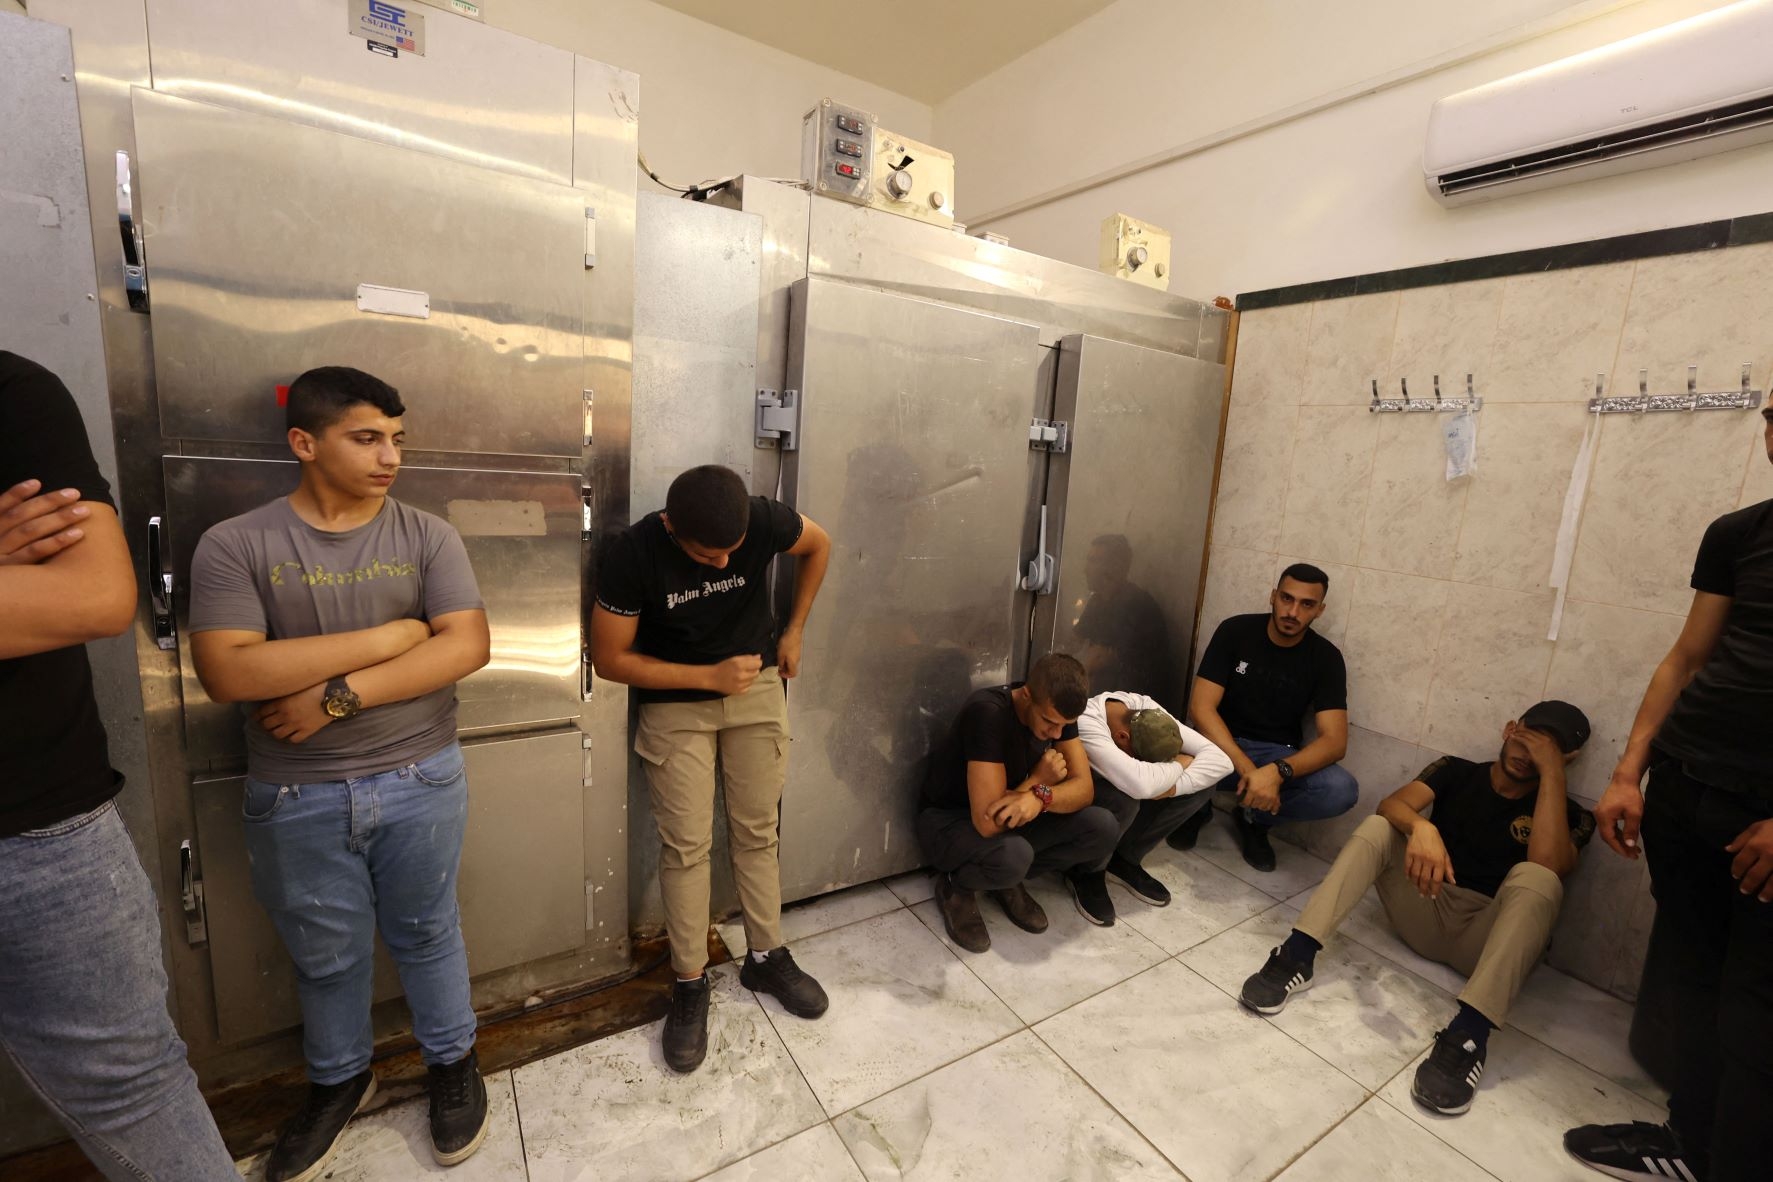 Friends and relatives mourn the death of Palestinian Uday Salah, 17, killed by Israeli forces, at the Jenin hospital morgue, in the occupied West Bank, on 15 September 2022 (AFP)